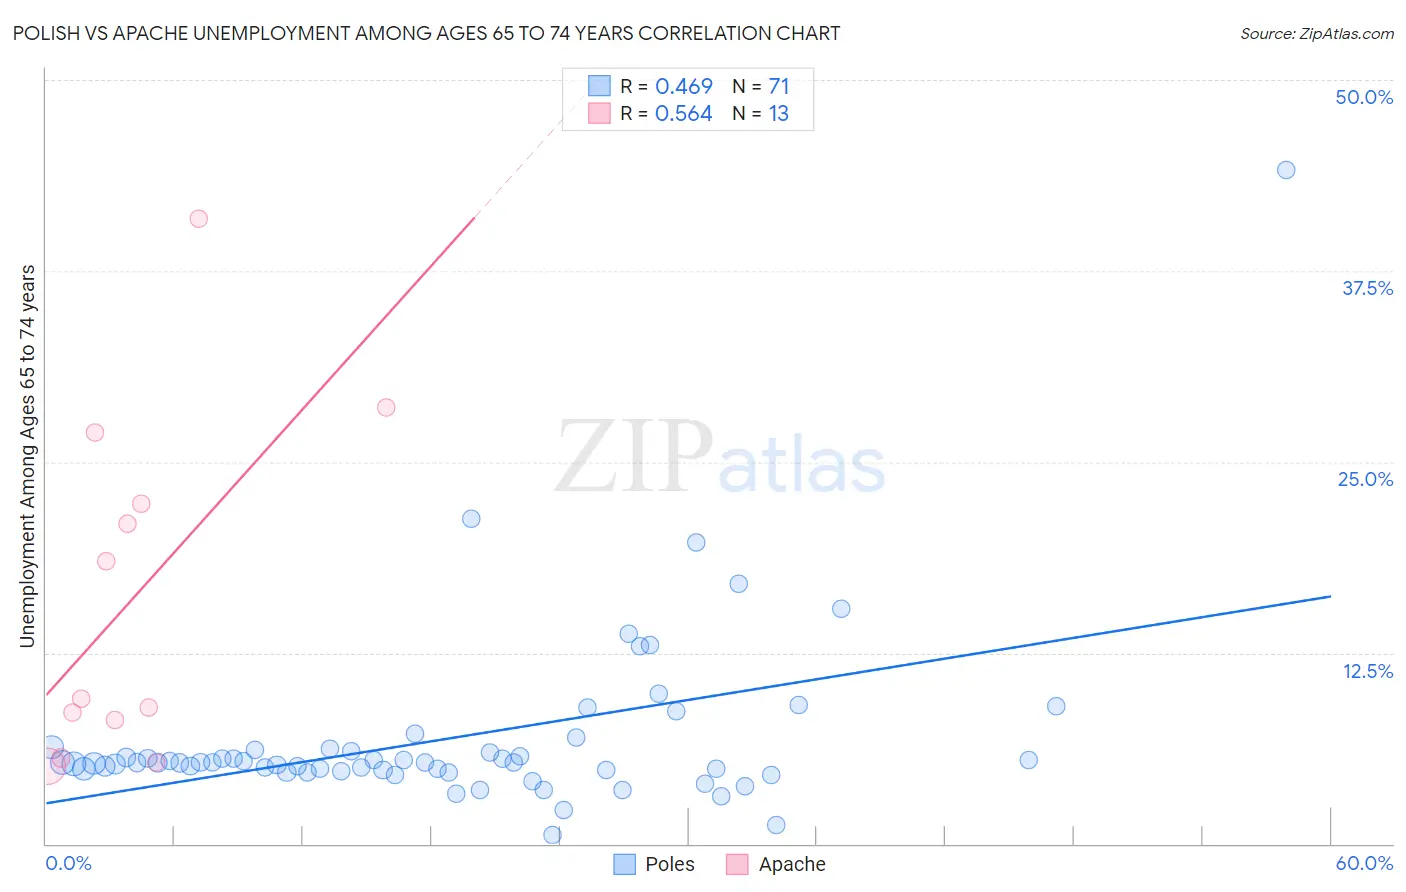 Polish vs Apache Unemployment Among Ages 65 to 74 years